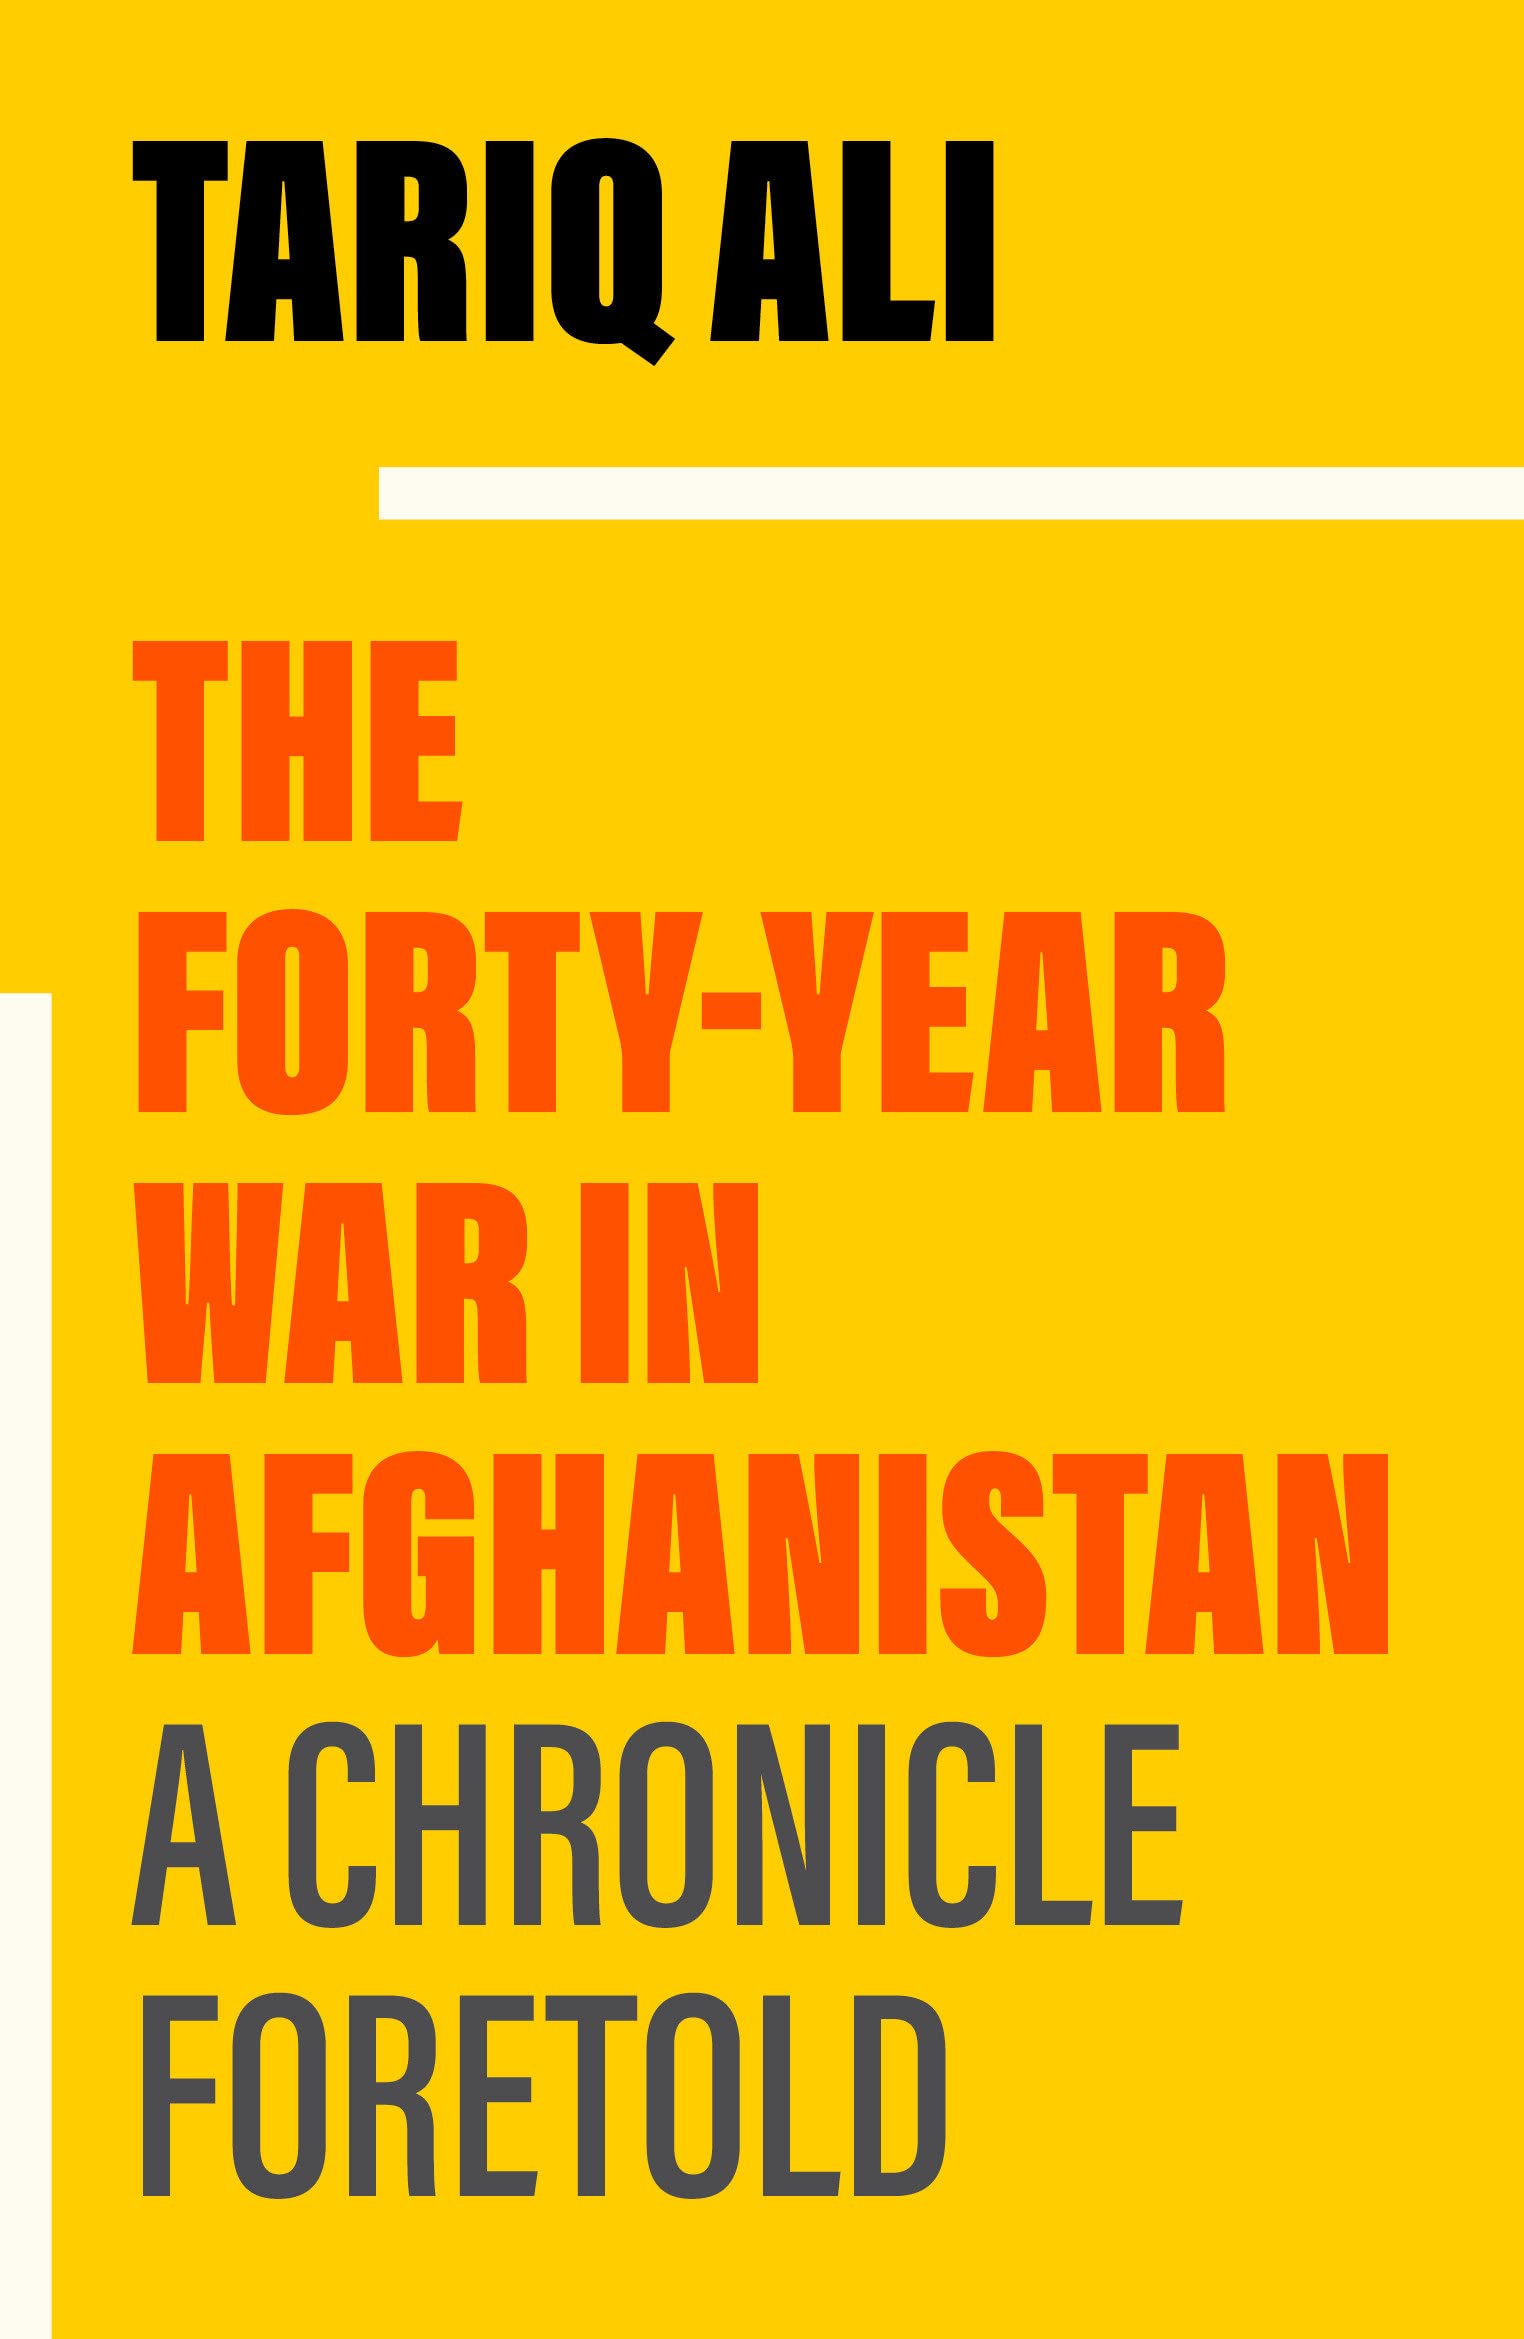 The Forty-Year War in Afghanistan: A Chronicle Foretold - Tariq Ali